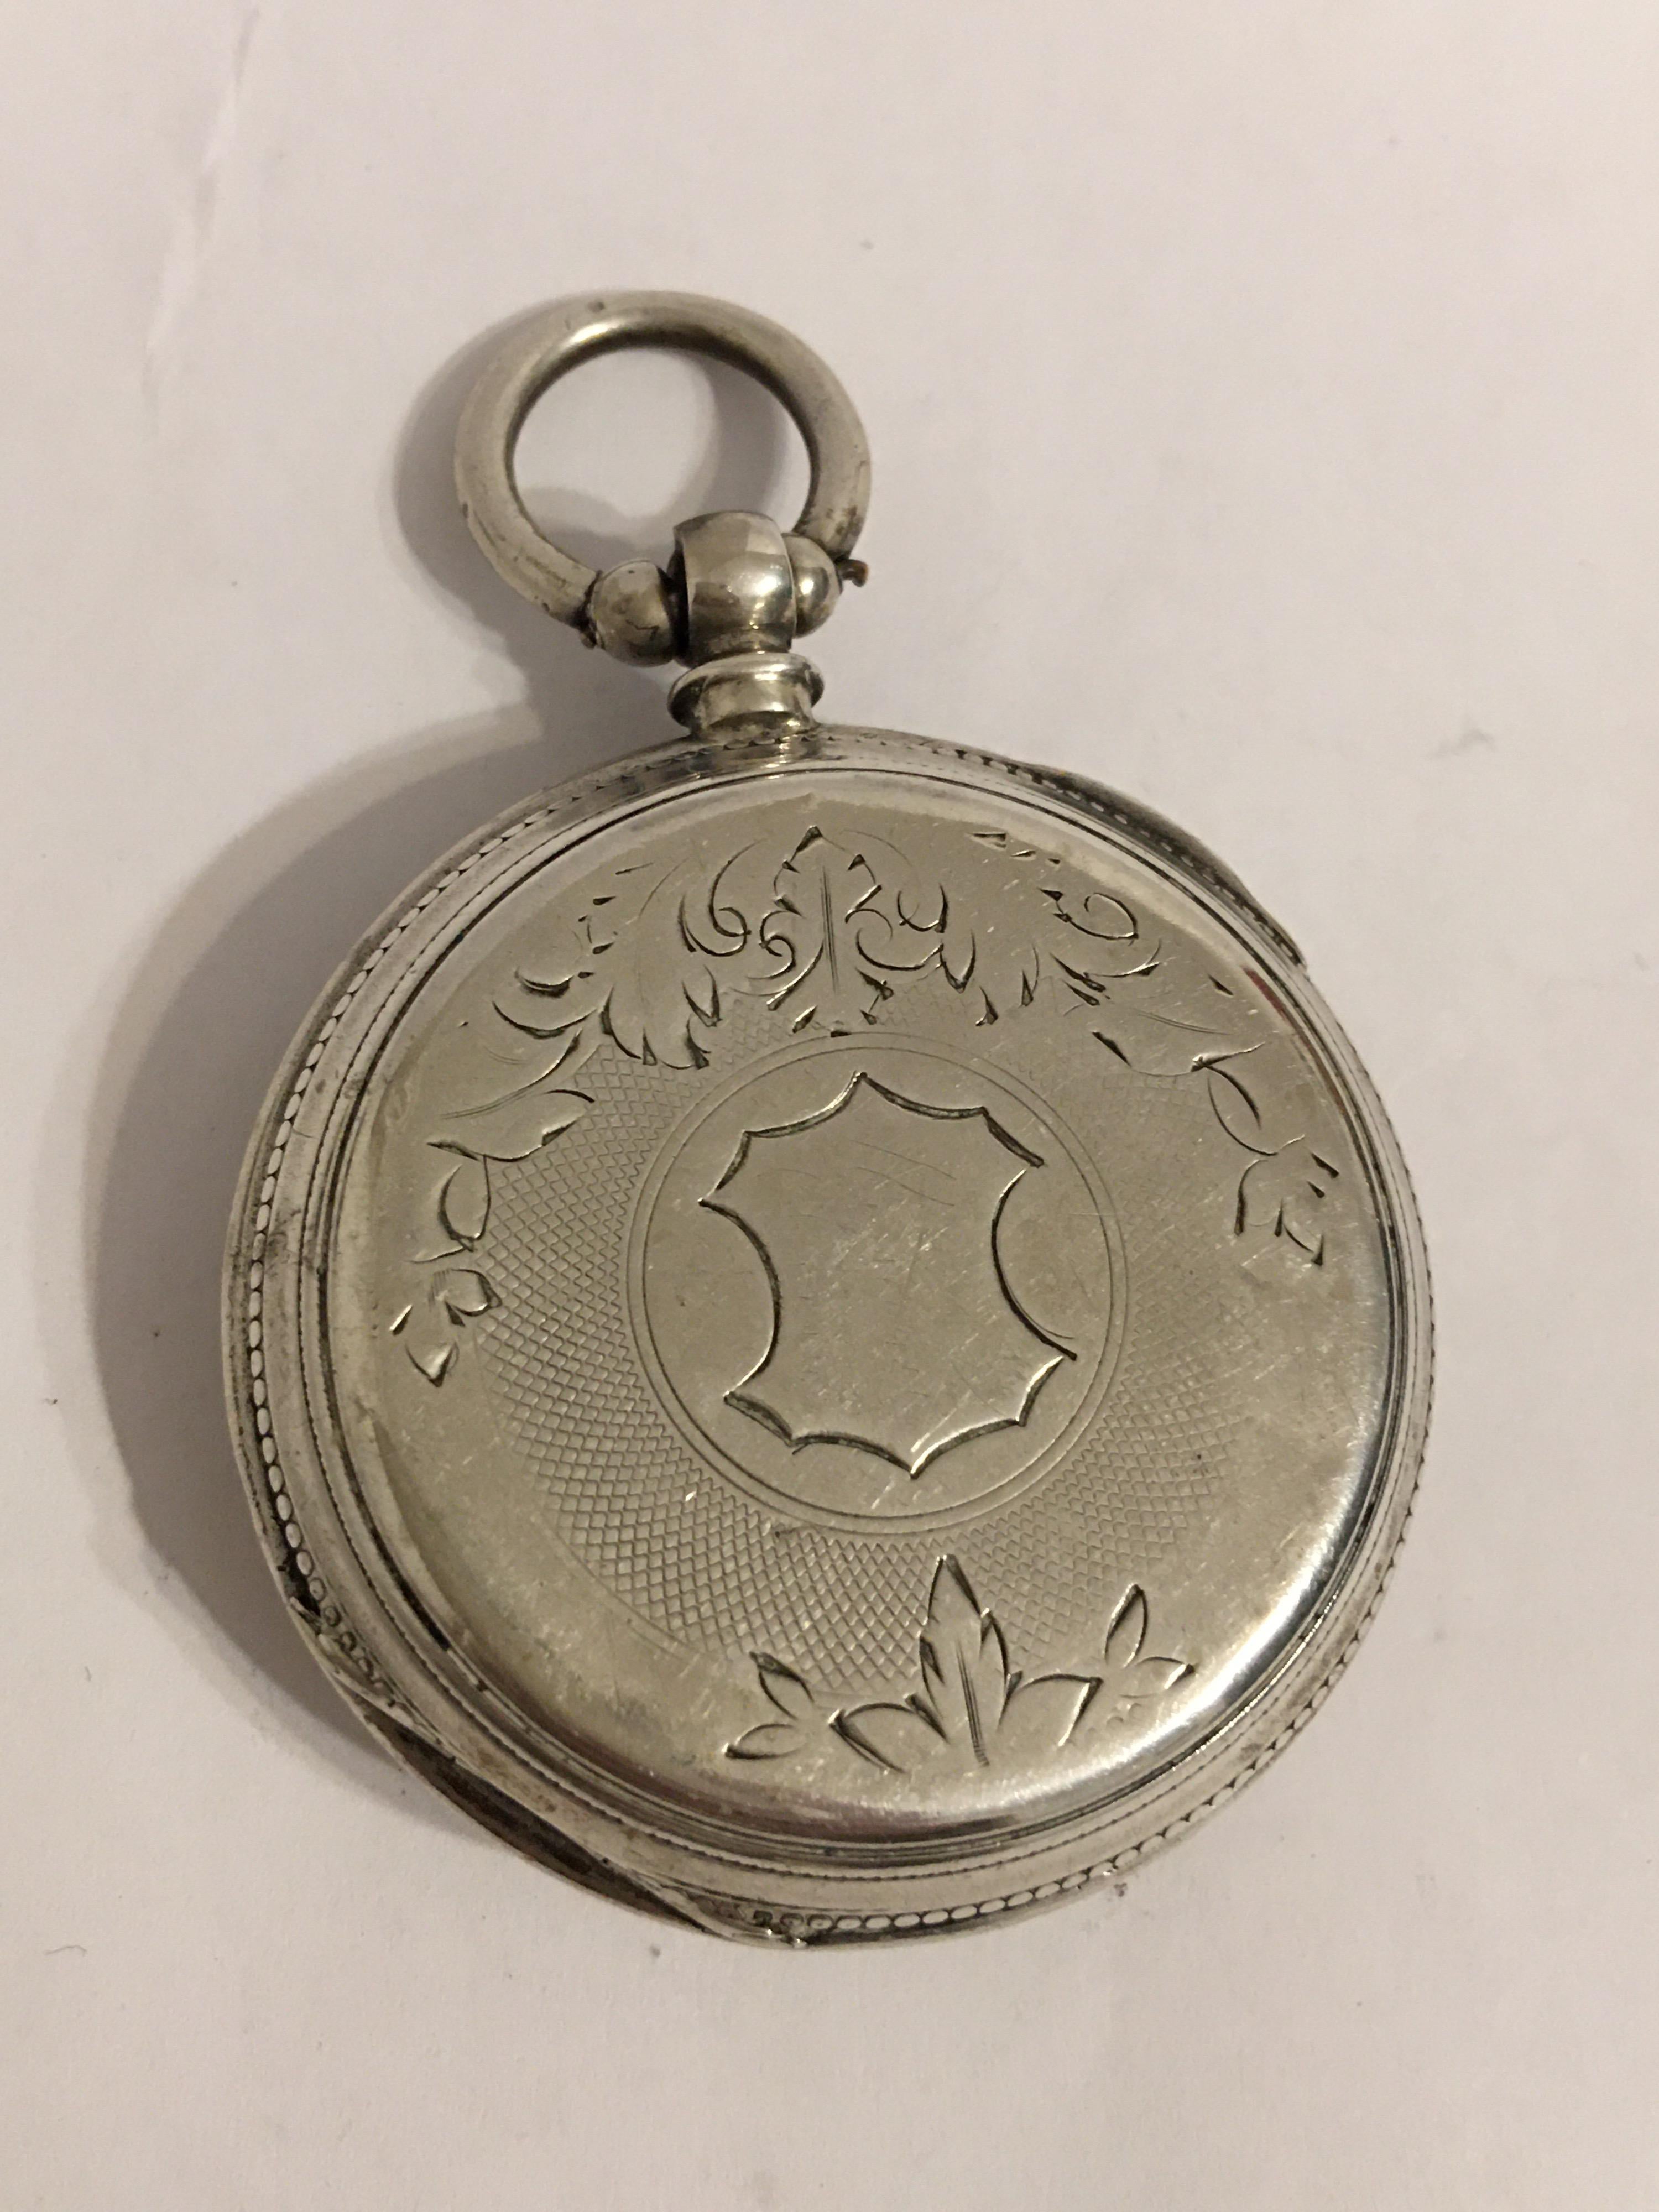 This stunning key-wind silver pocket watch is working and is ticking well. It comes with a key. Visible cracks and chipped on the dial as shown. 

Please study the images carefully as form part of the description.

